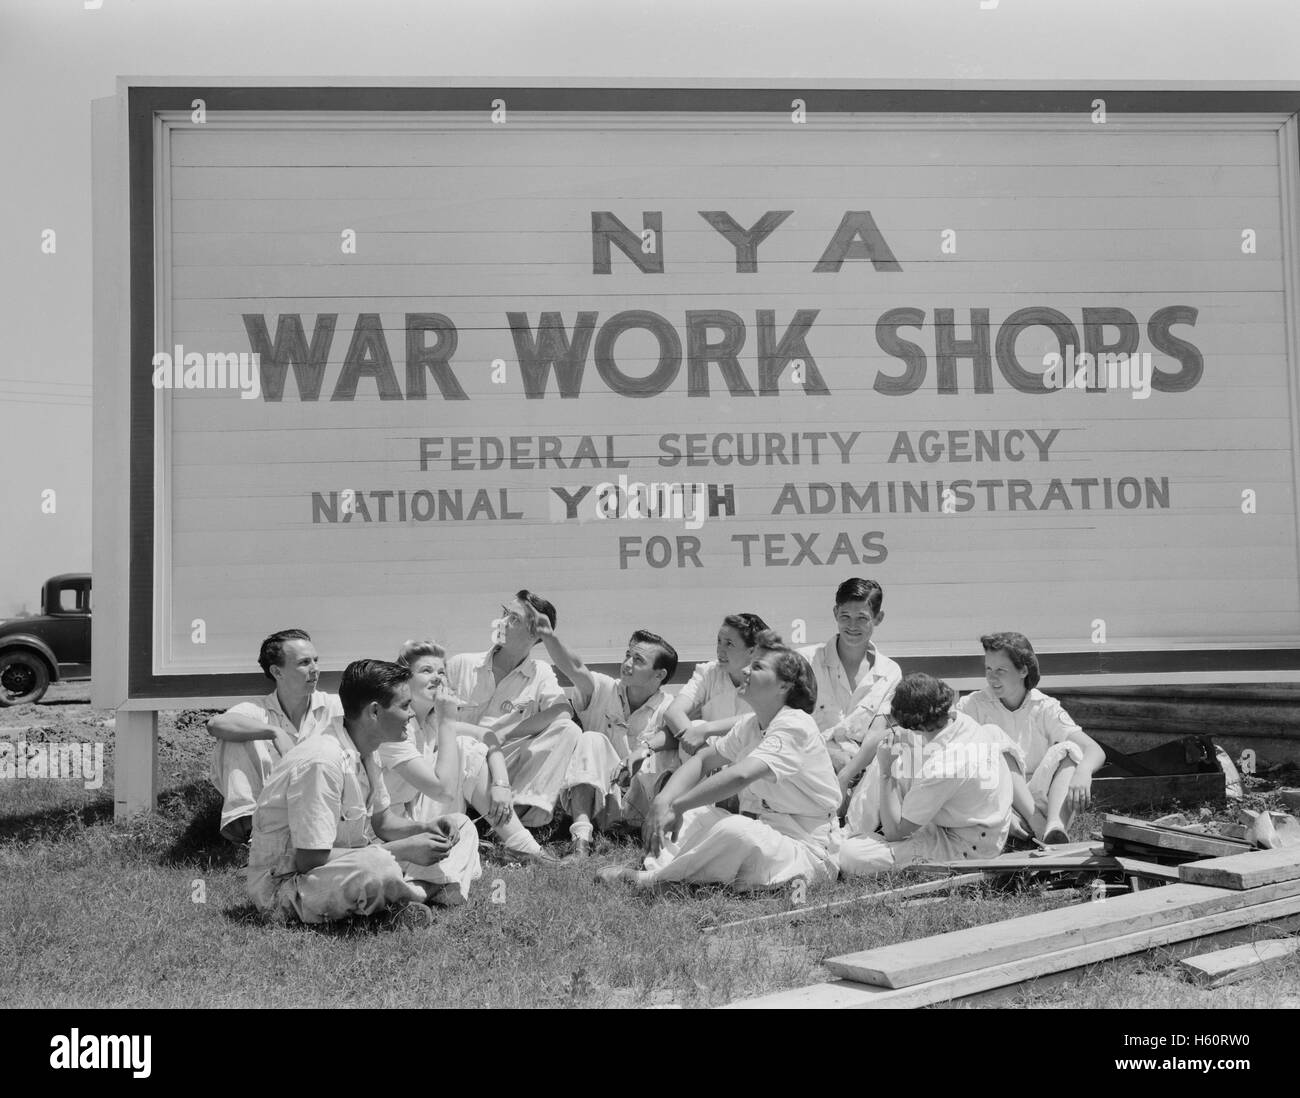 National Youth Administration (NYA) Trainees for War Jobs watching U.S. Navy Planes they are learning to service at U.S. Naval Air Base, Corpus Christi, Texas, USA, Howard R. Hollem, U.S. Office of War Information, August 1942 Stock Photo